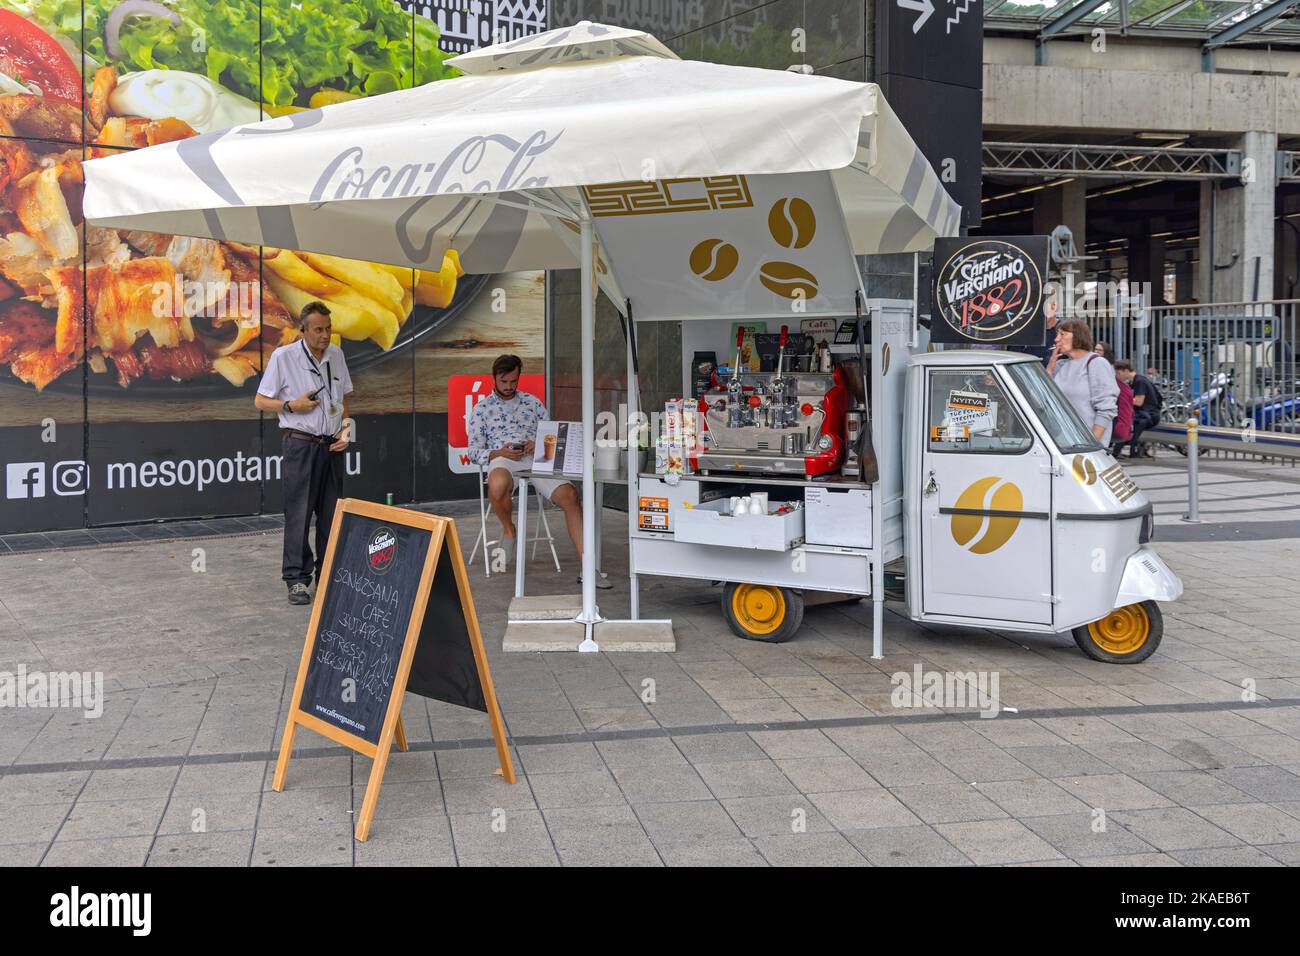 Budapest, Hungary - July 31, 2022: Mobile Italian Caffe Vergnano in Front of Westend Shopping Mall and Train Station at Summer Afternoon. Stock Photo